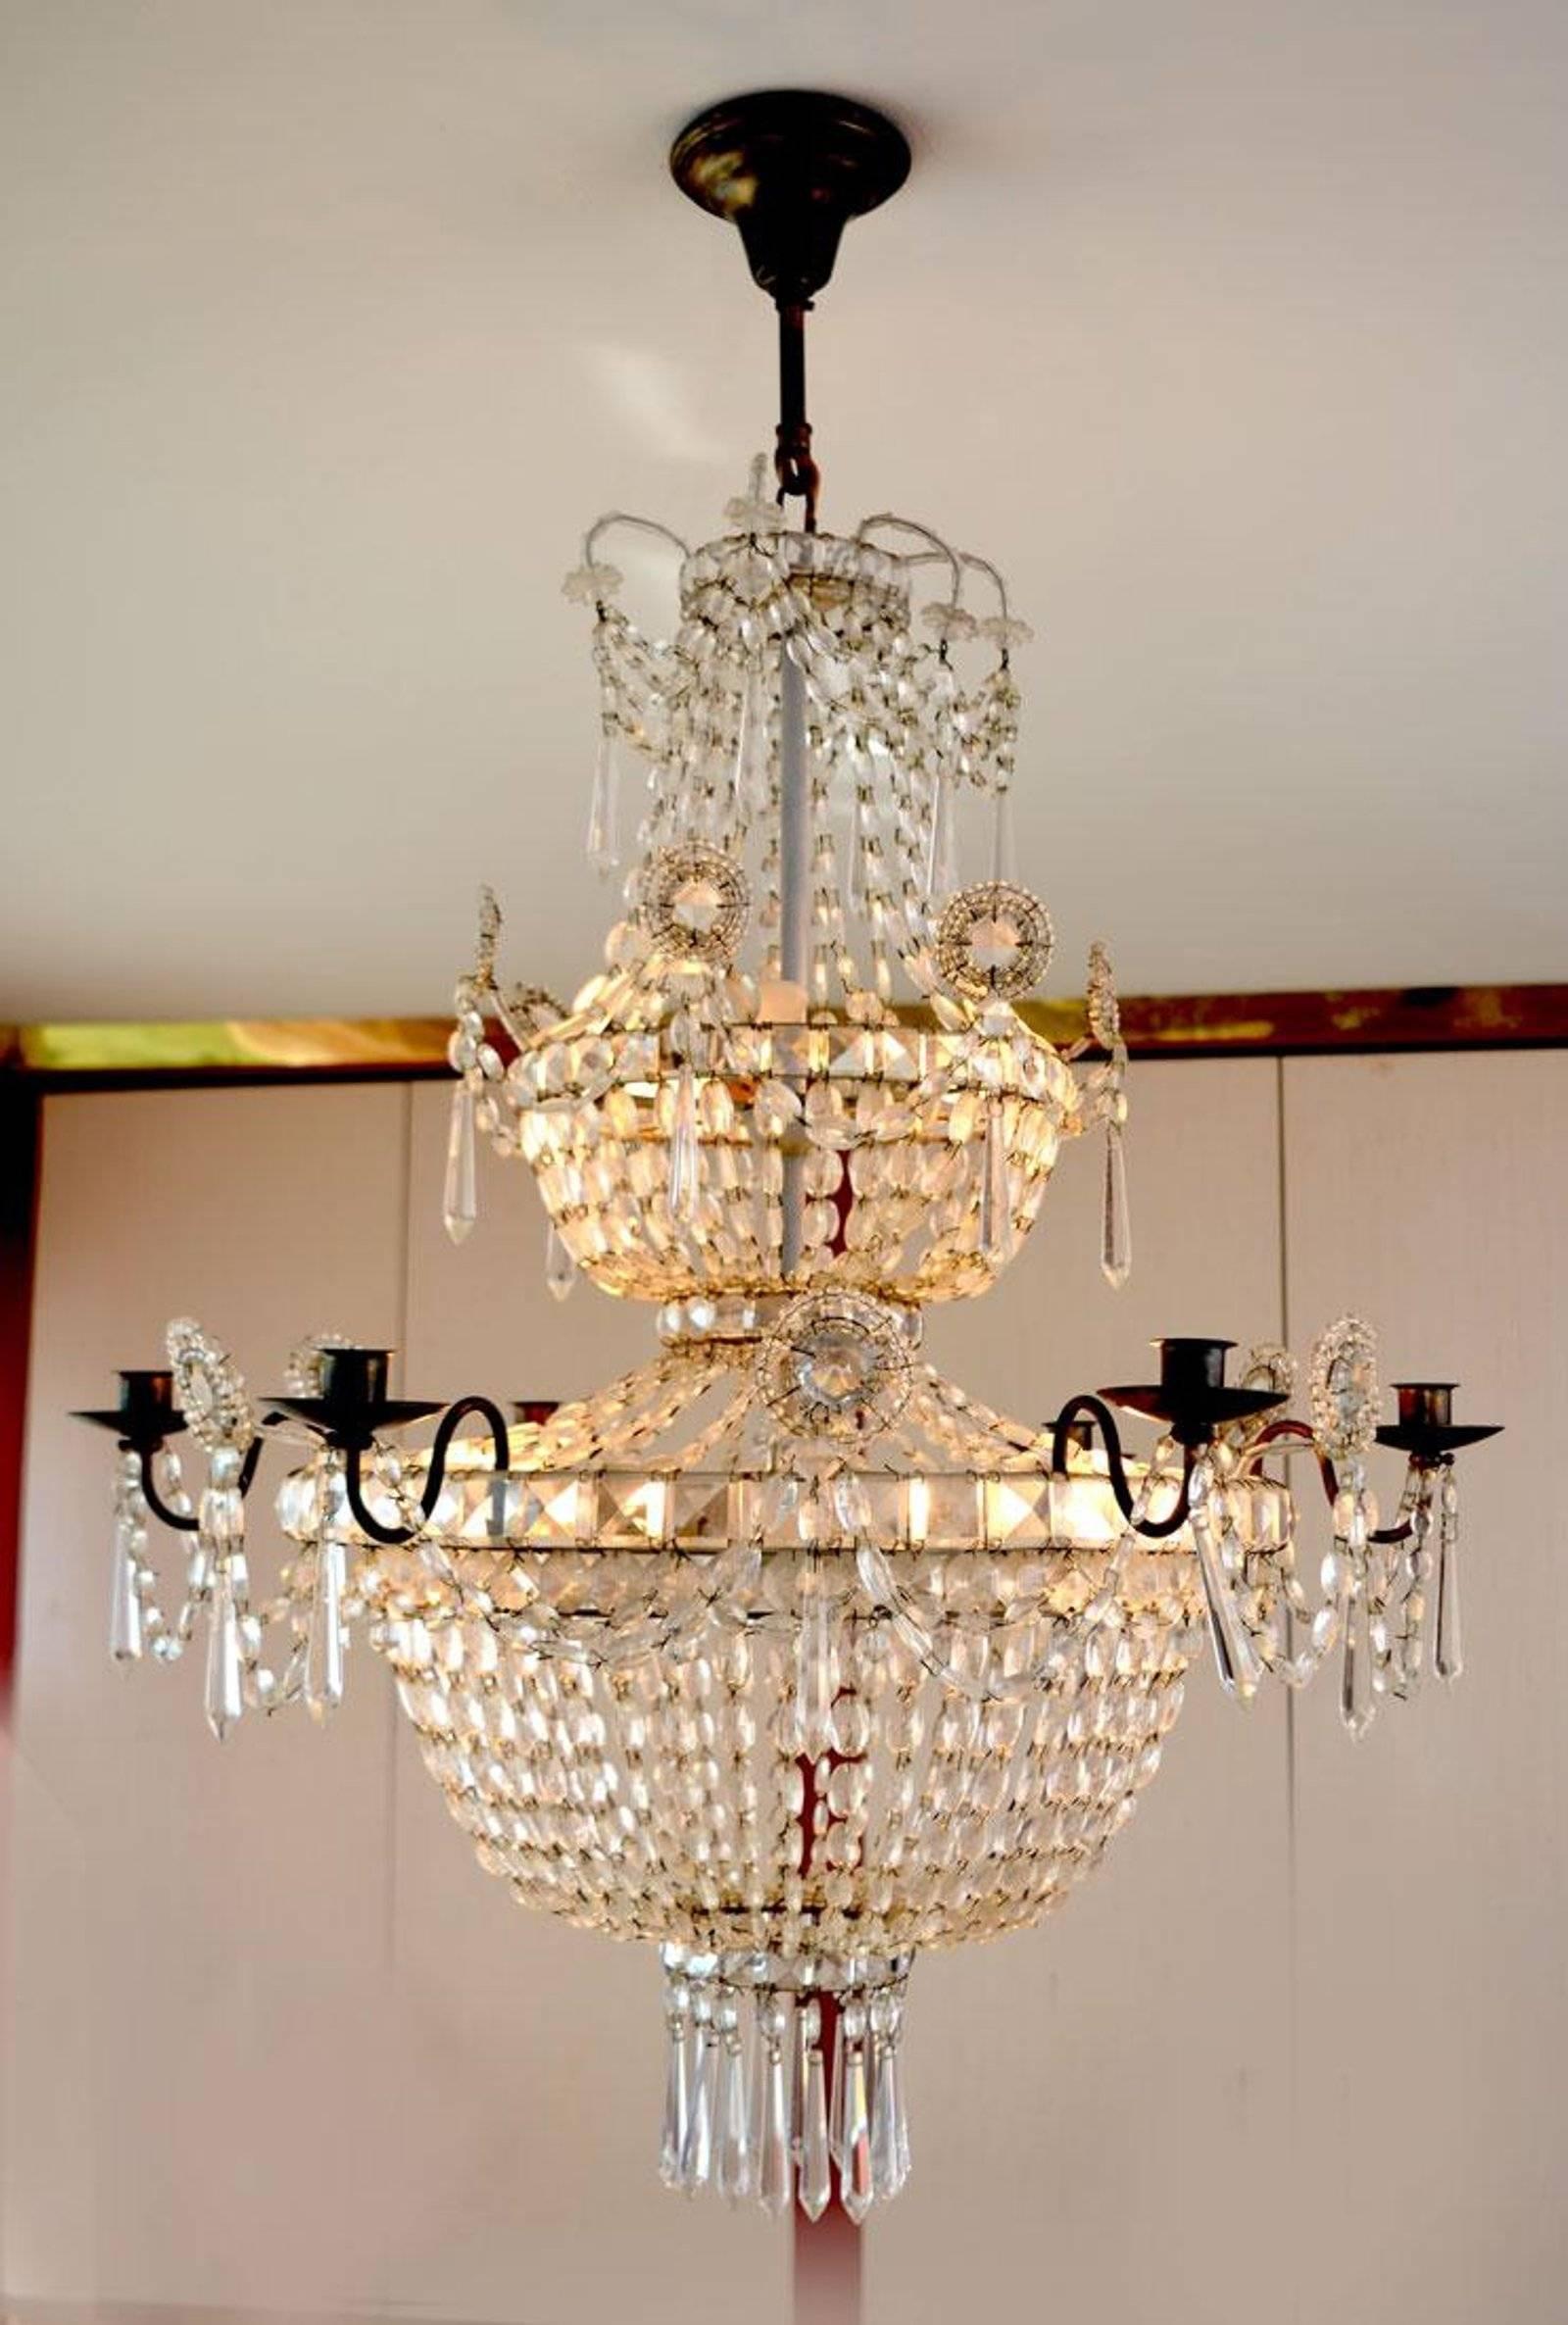 19th century Swedish neoclassical crystal chandelier

--Three tiers
--Six arms
--Can be French wired at customer's request
--Urn form Gustavian style.